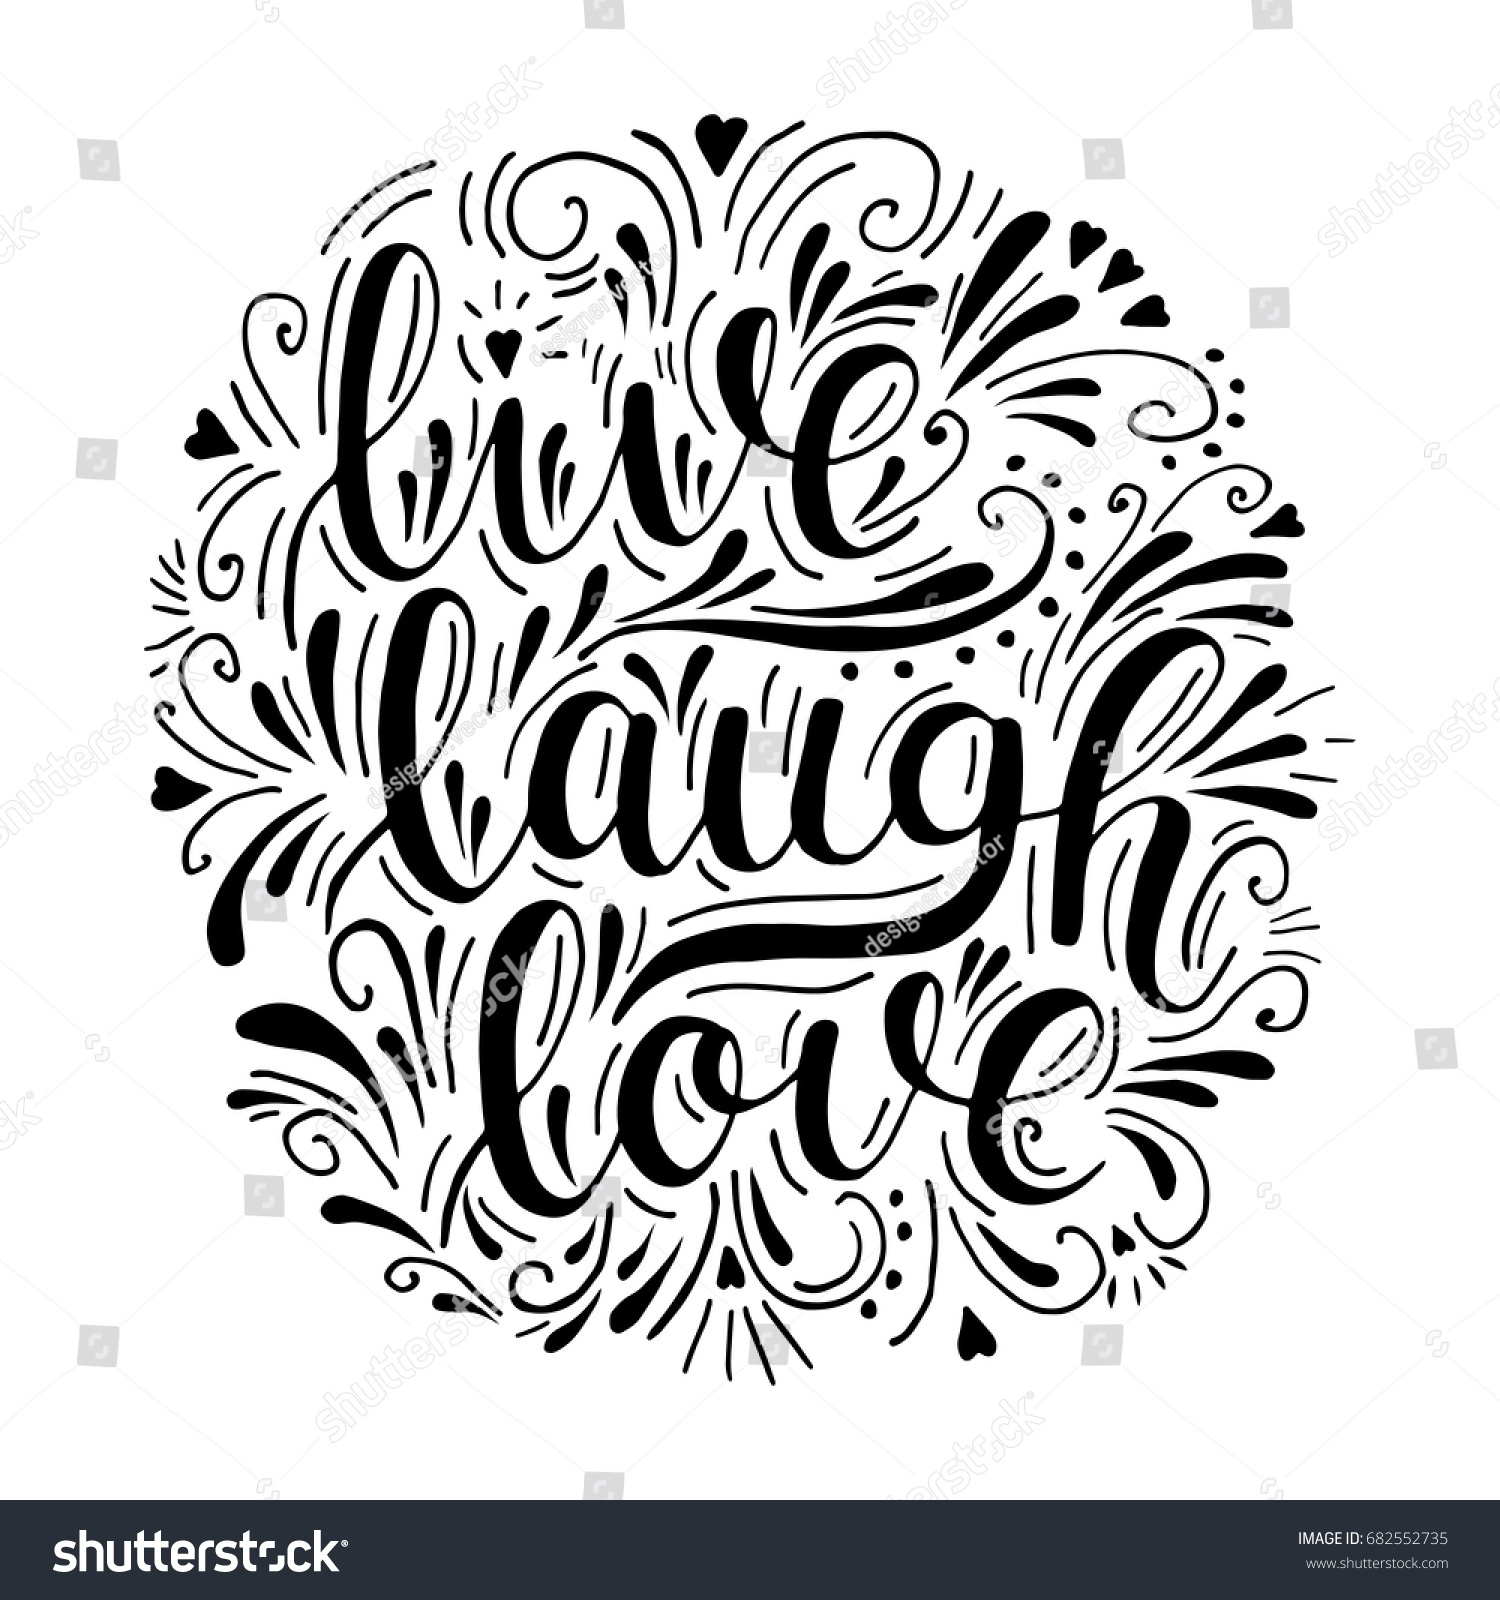 Live laugh love Vector inspirational hand drawn lettering Motivation quote